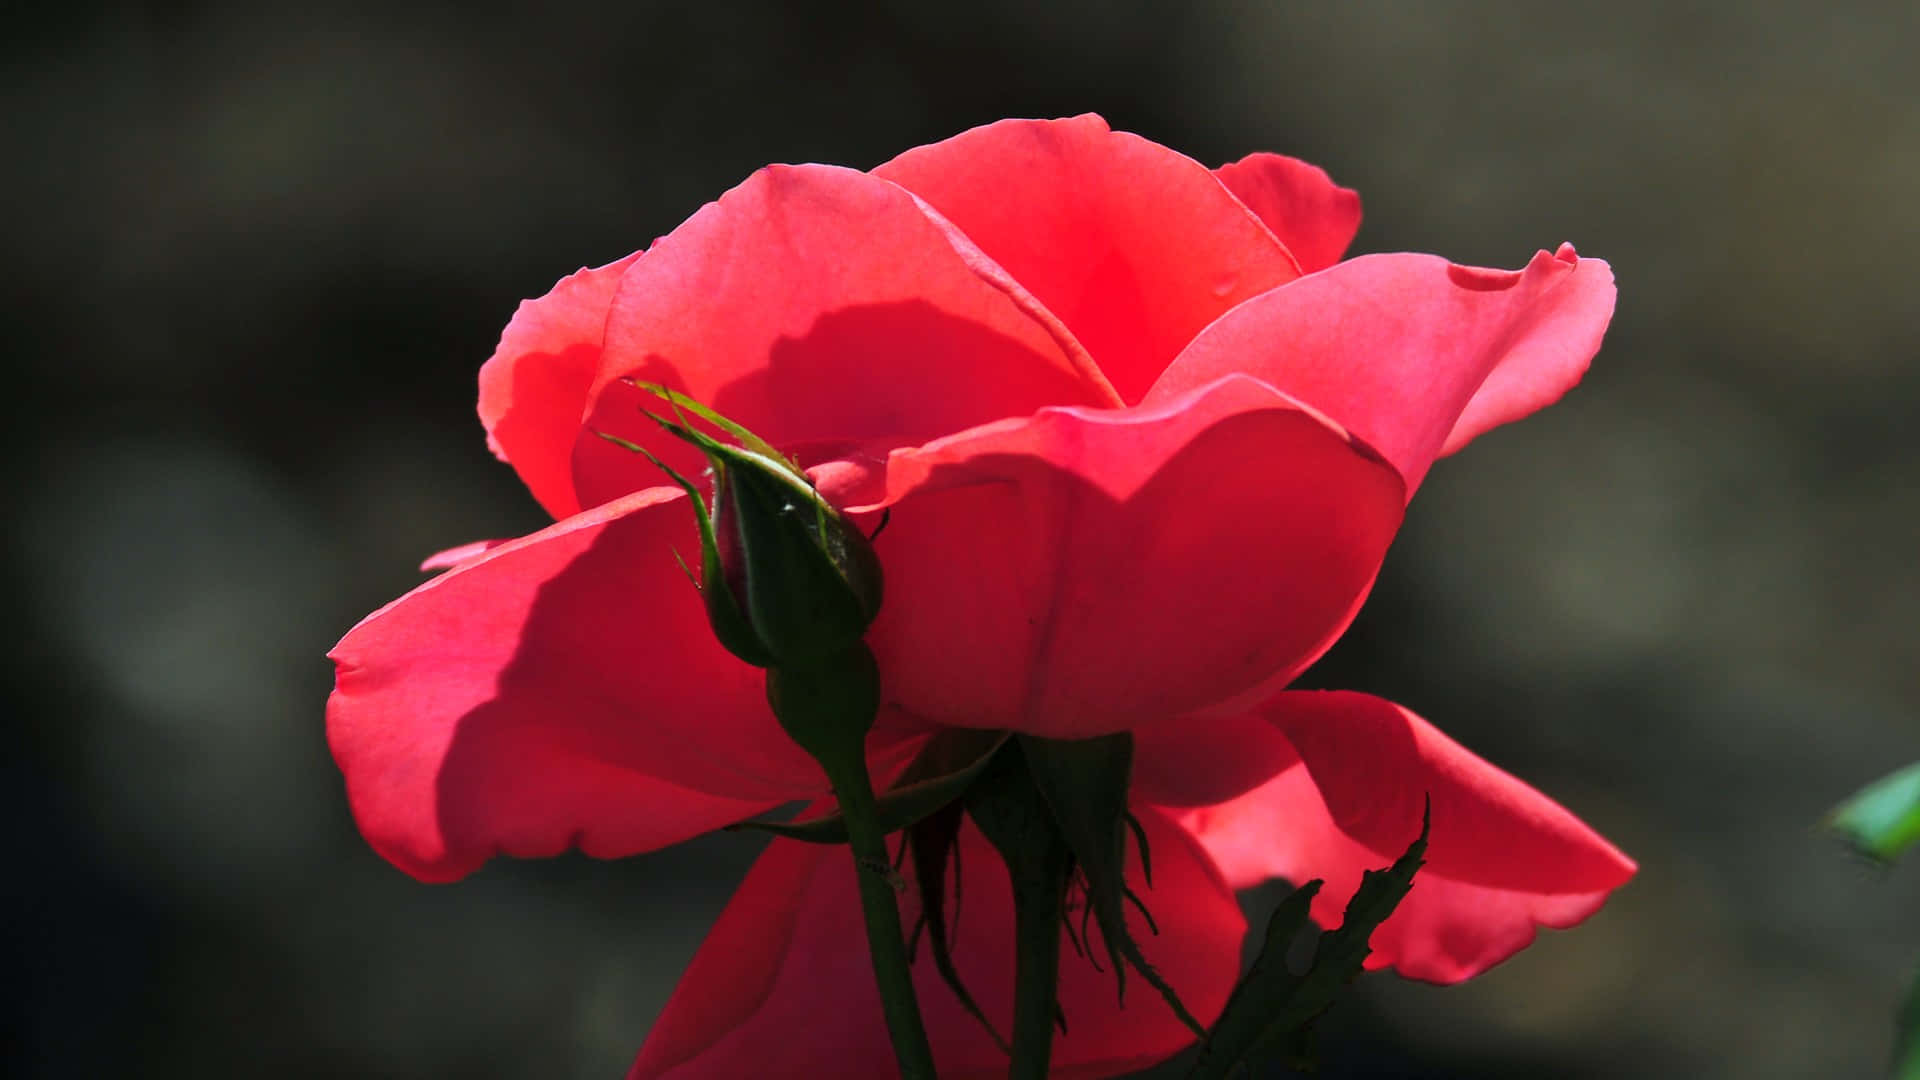 'A bright and beautiful pink rose to brighten your day' Wallpaper